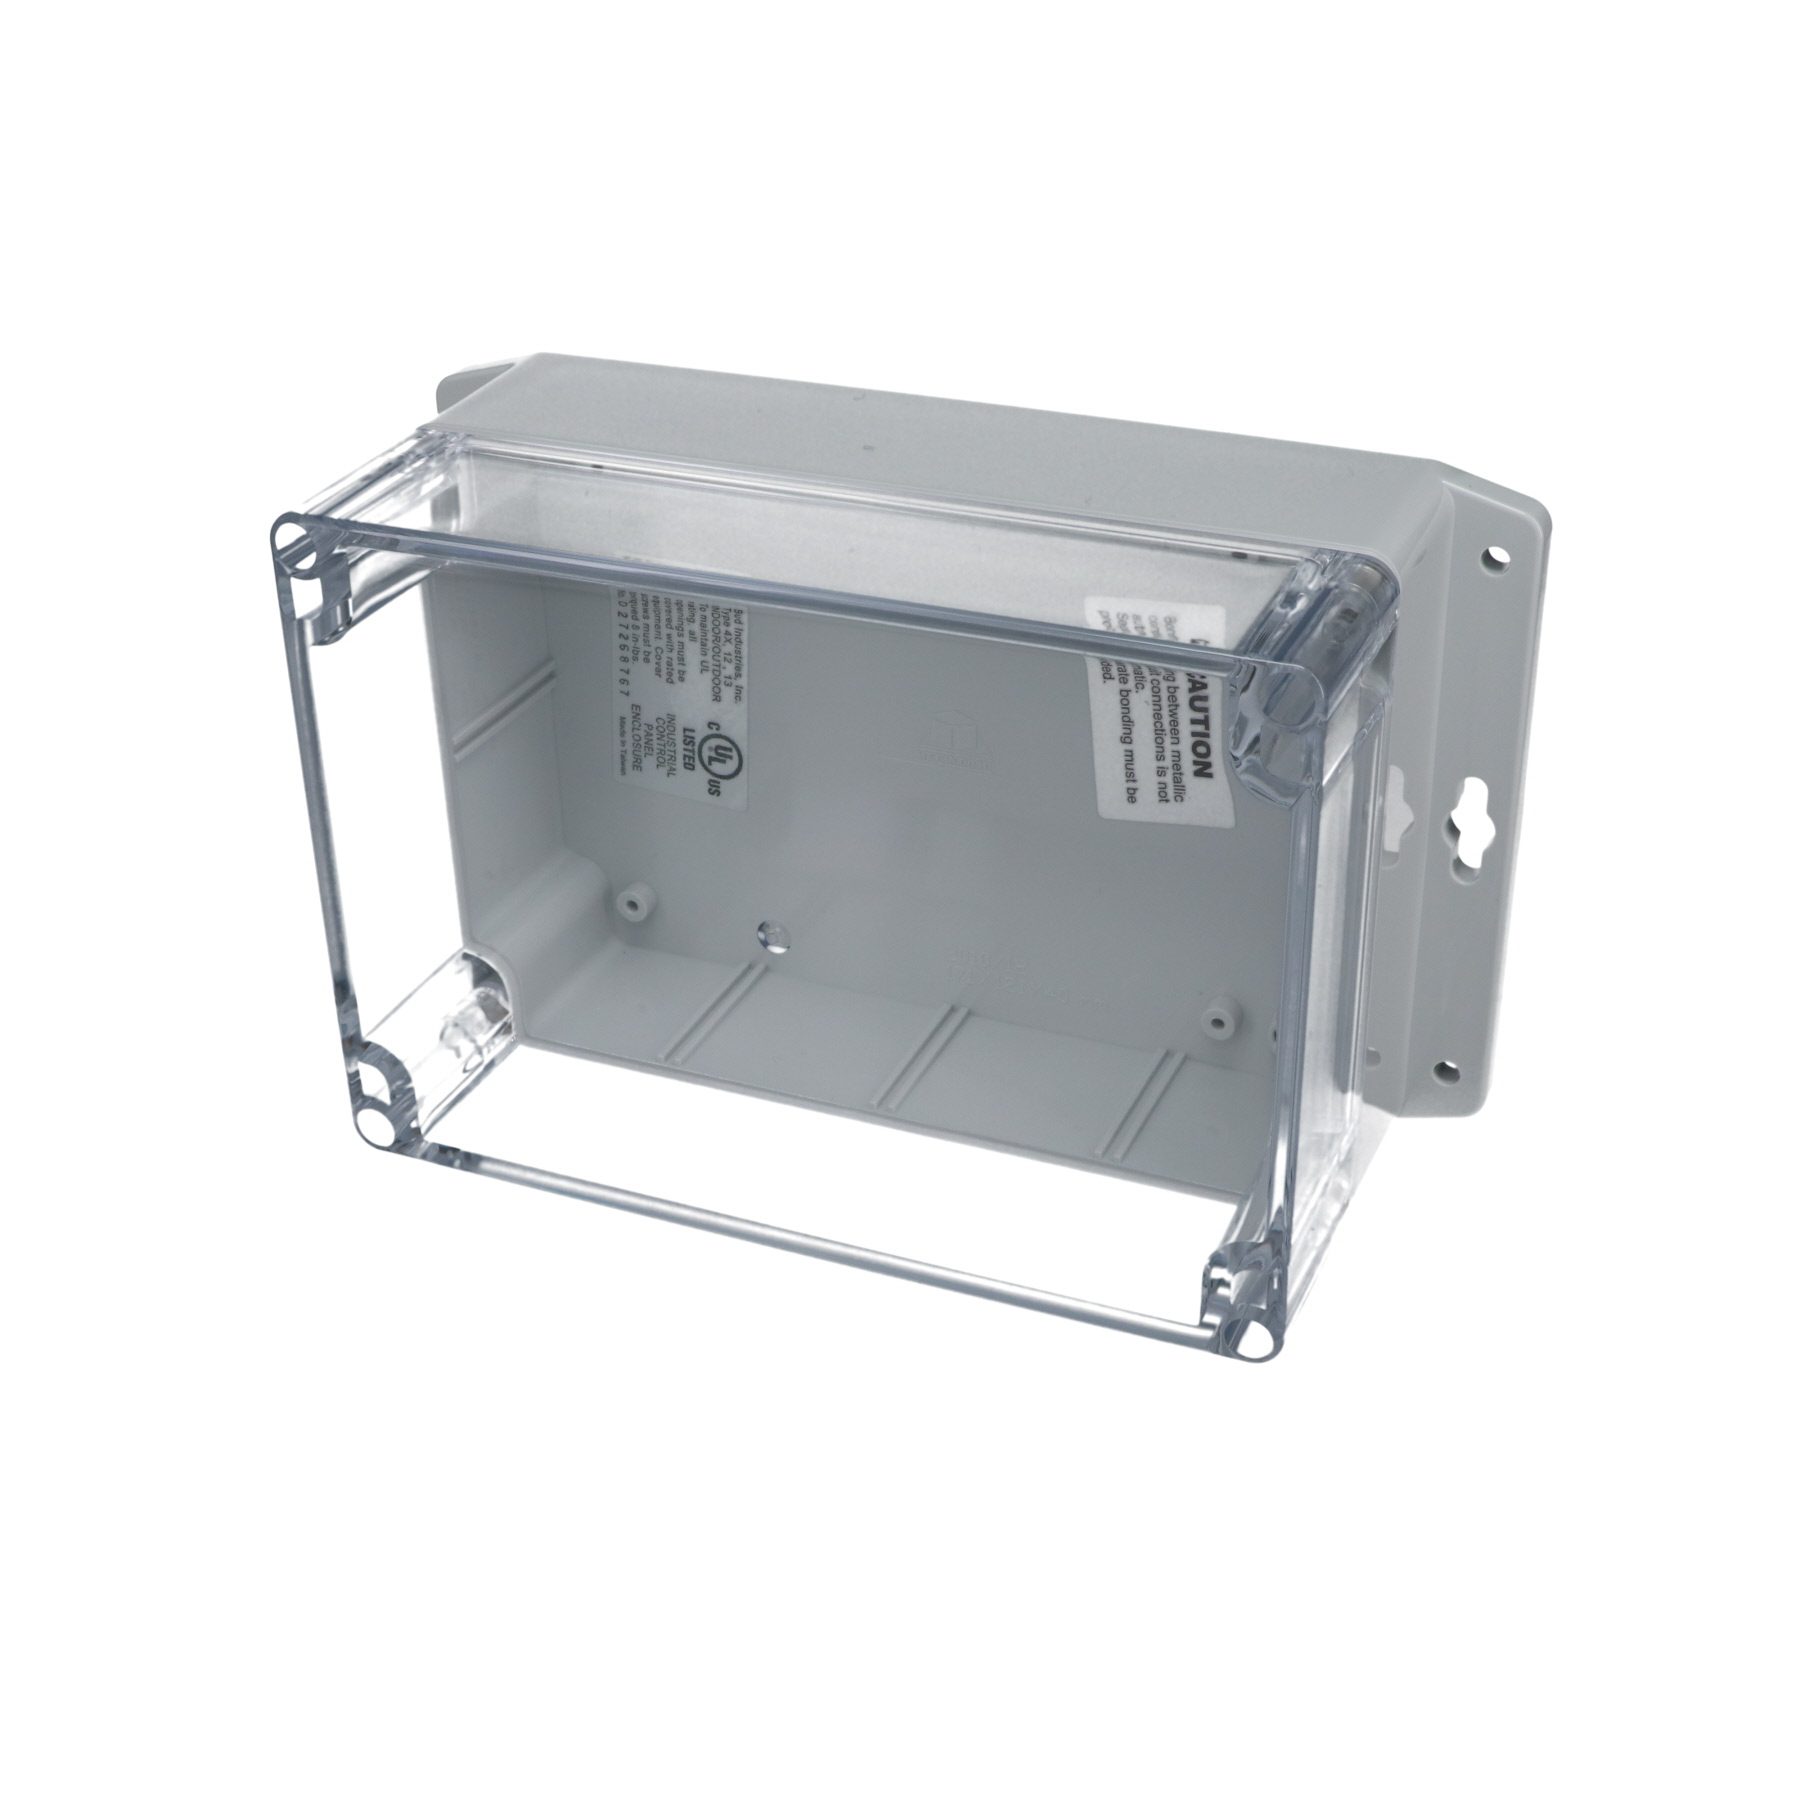 IP65 NEMA 4X Box with Clear Cover and Mounting Brackets PN-1327-CMB